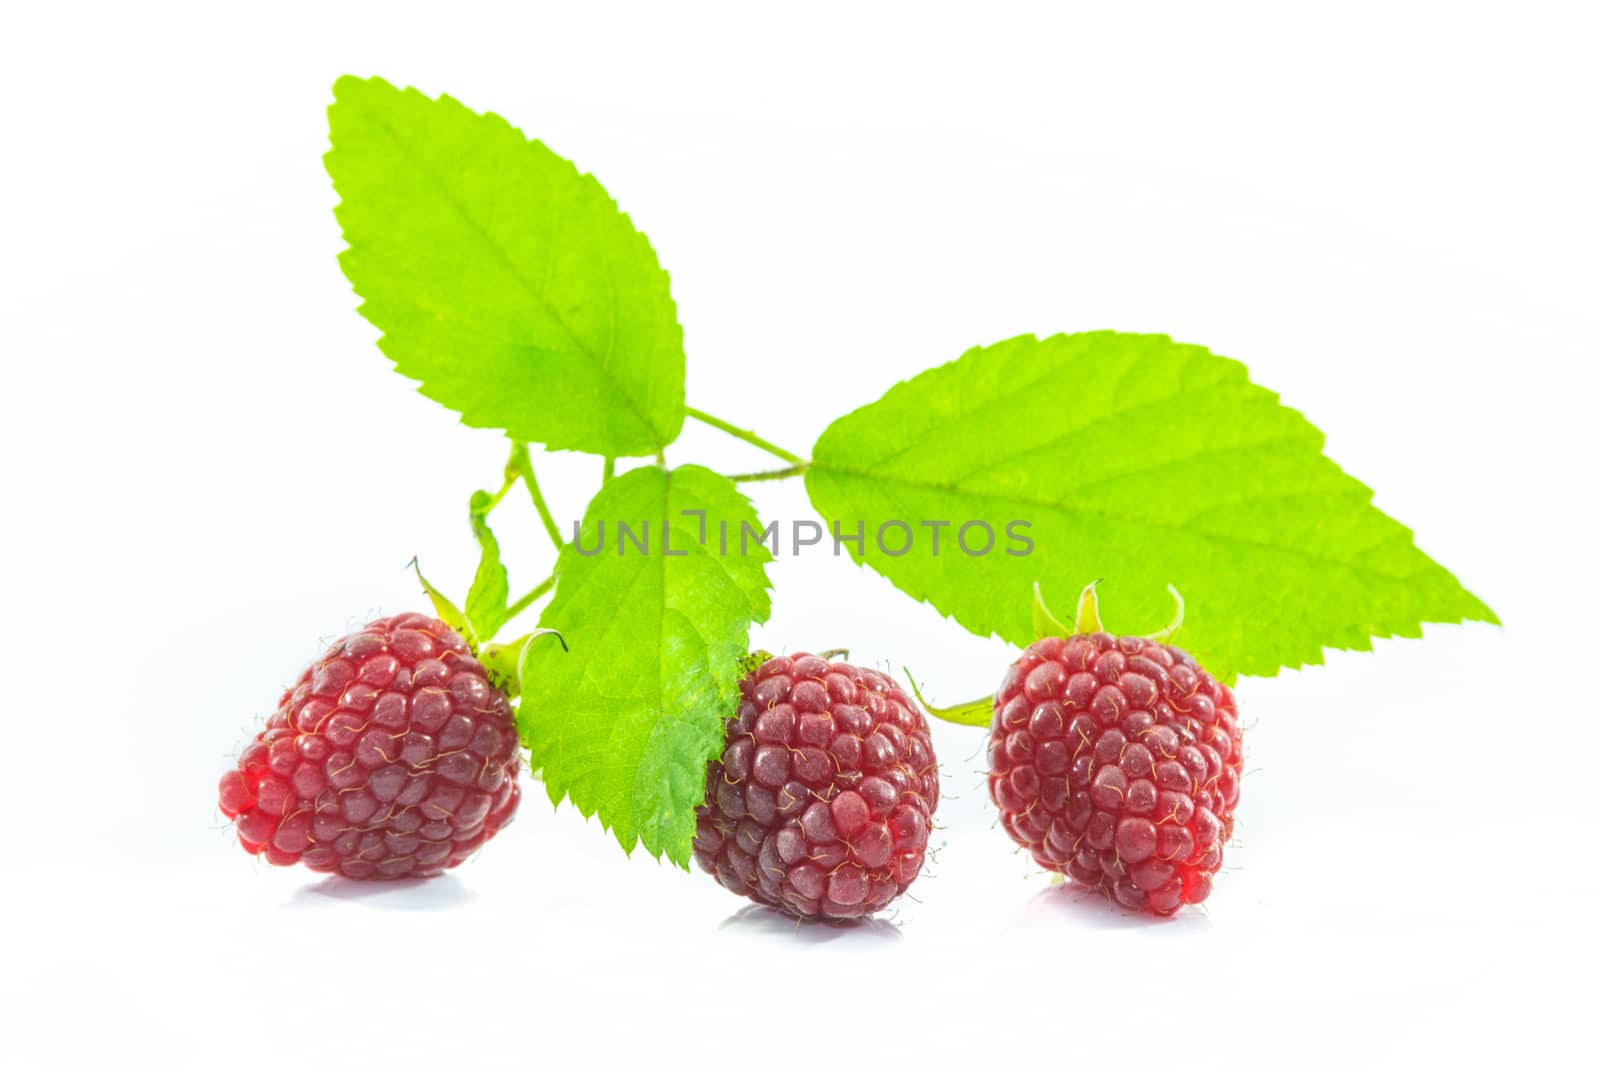 Delicious and ripe raspberries by wdnet_studio